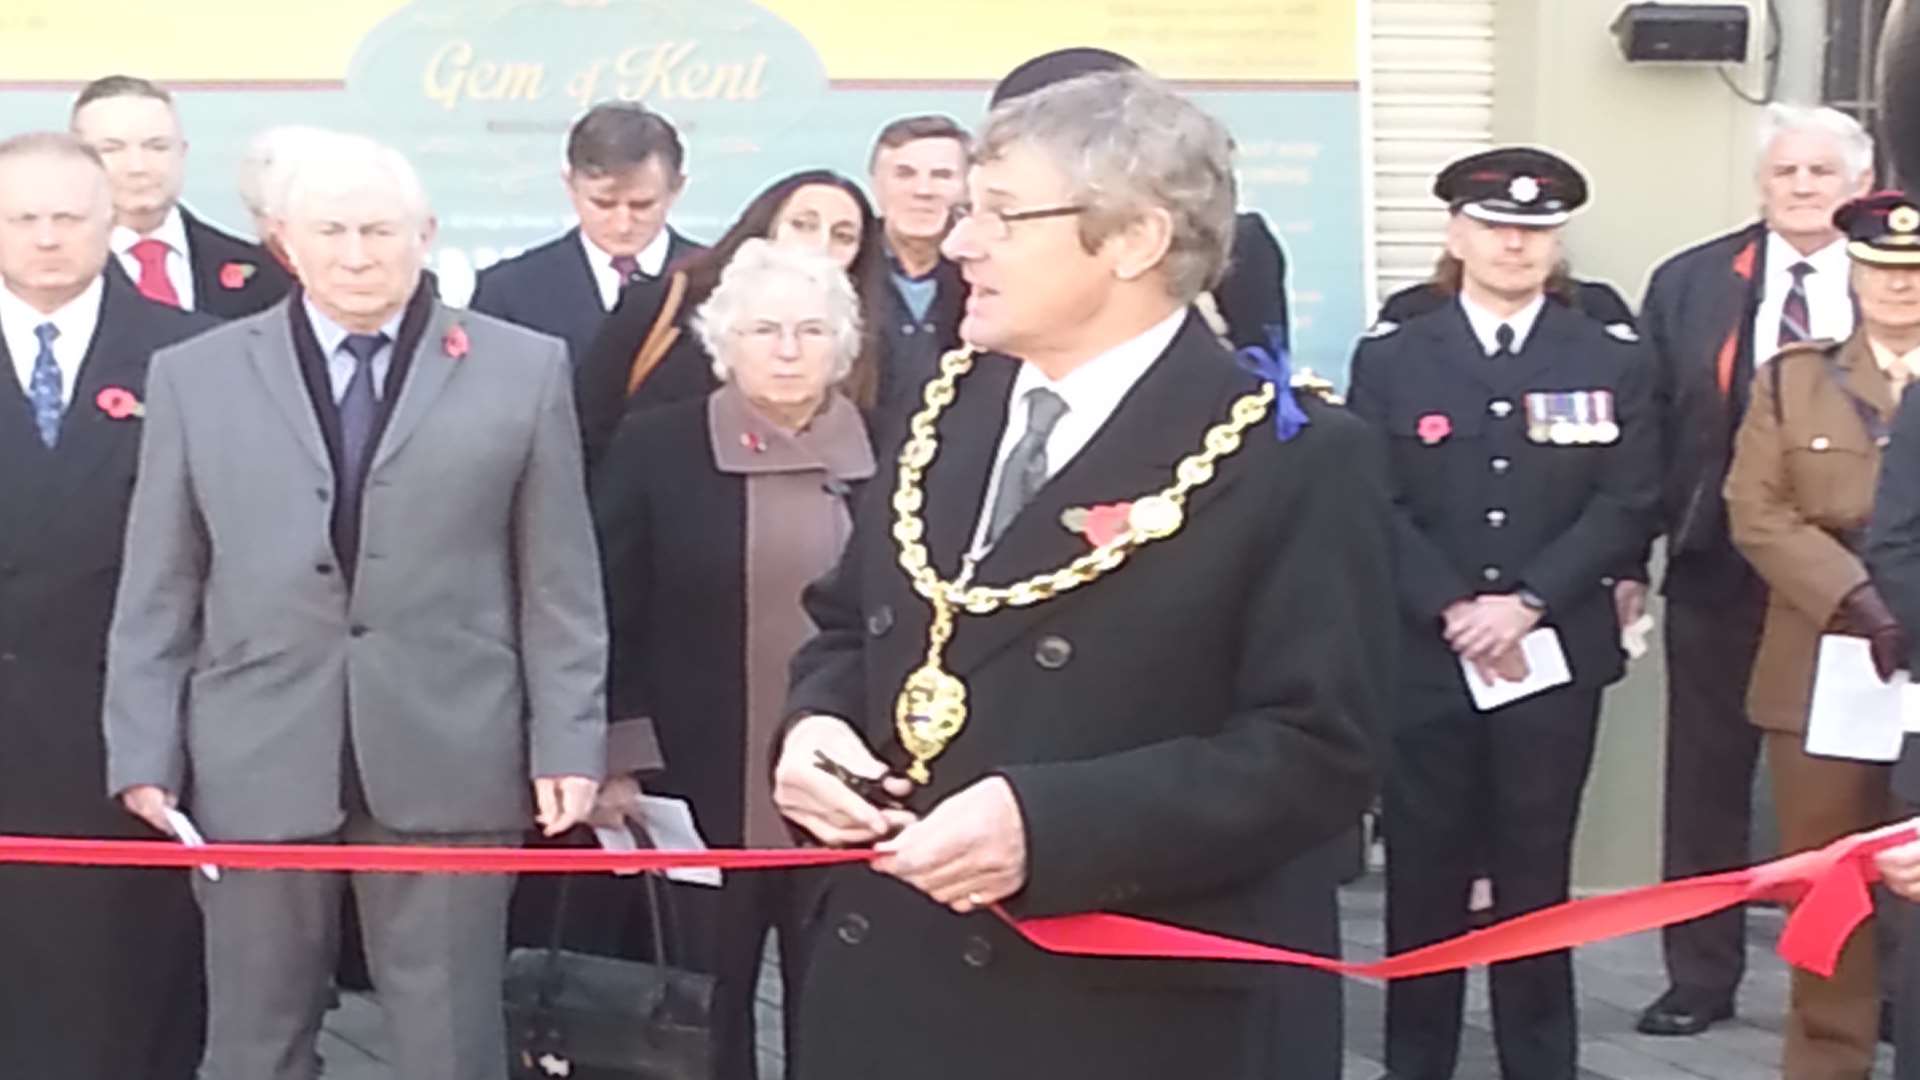 The Mayor cuts a ribbon to open the square